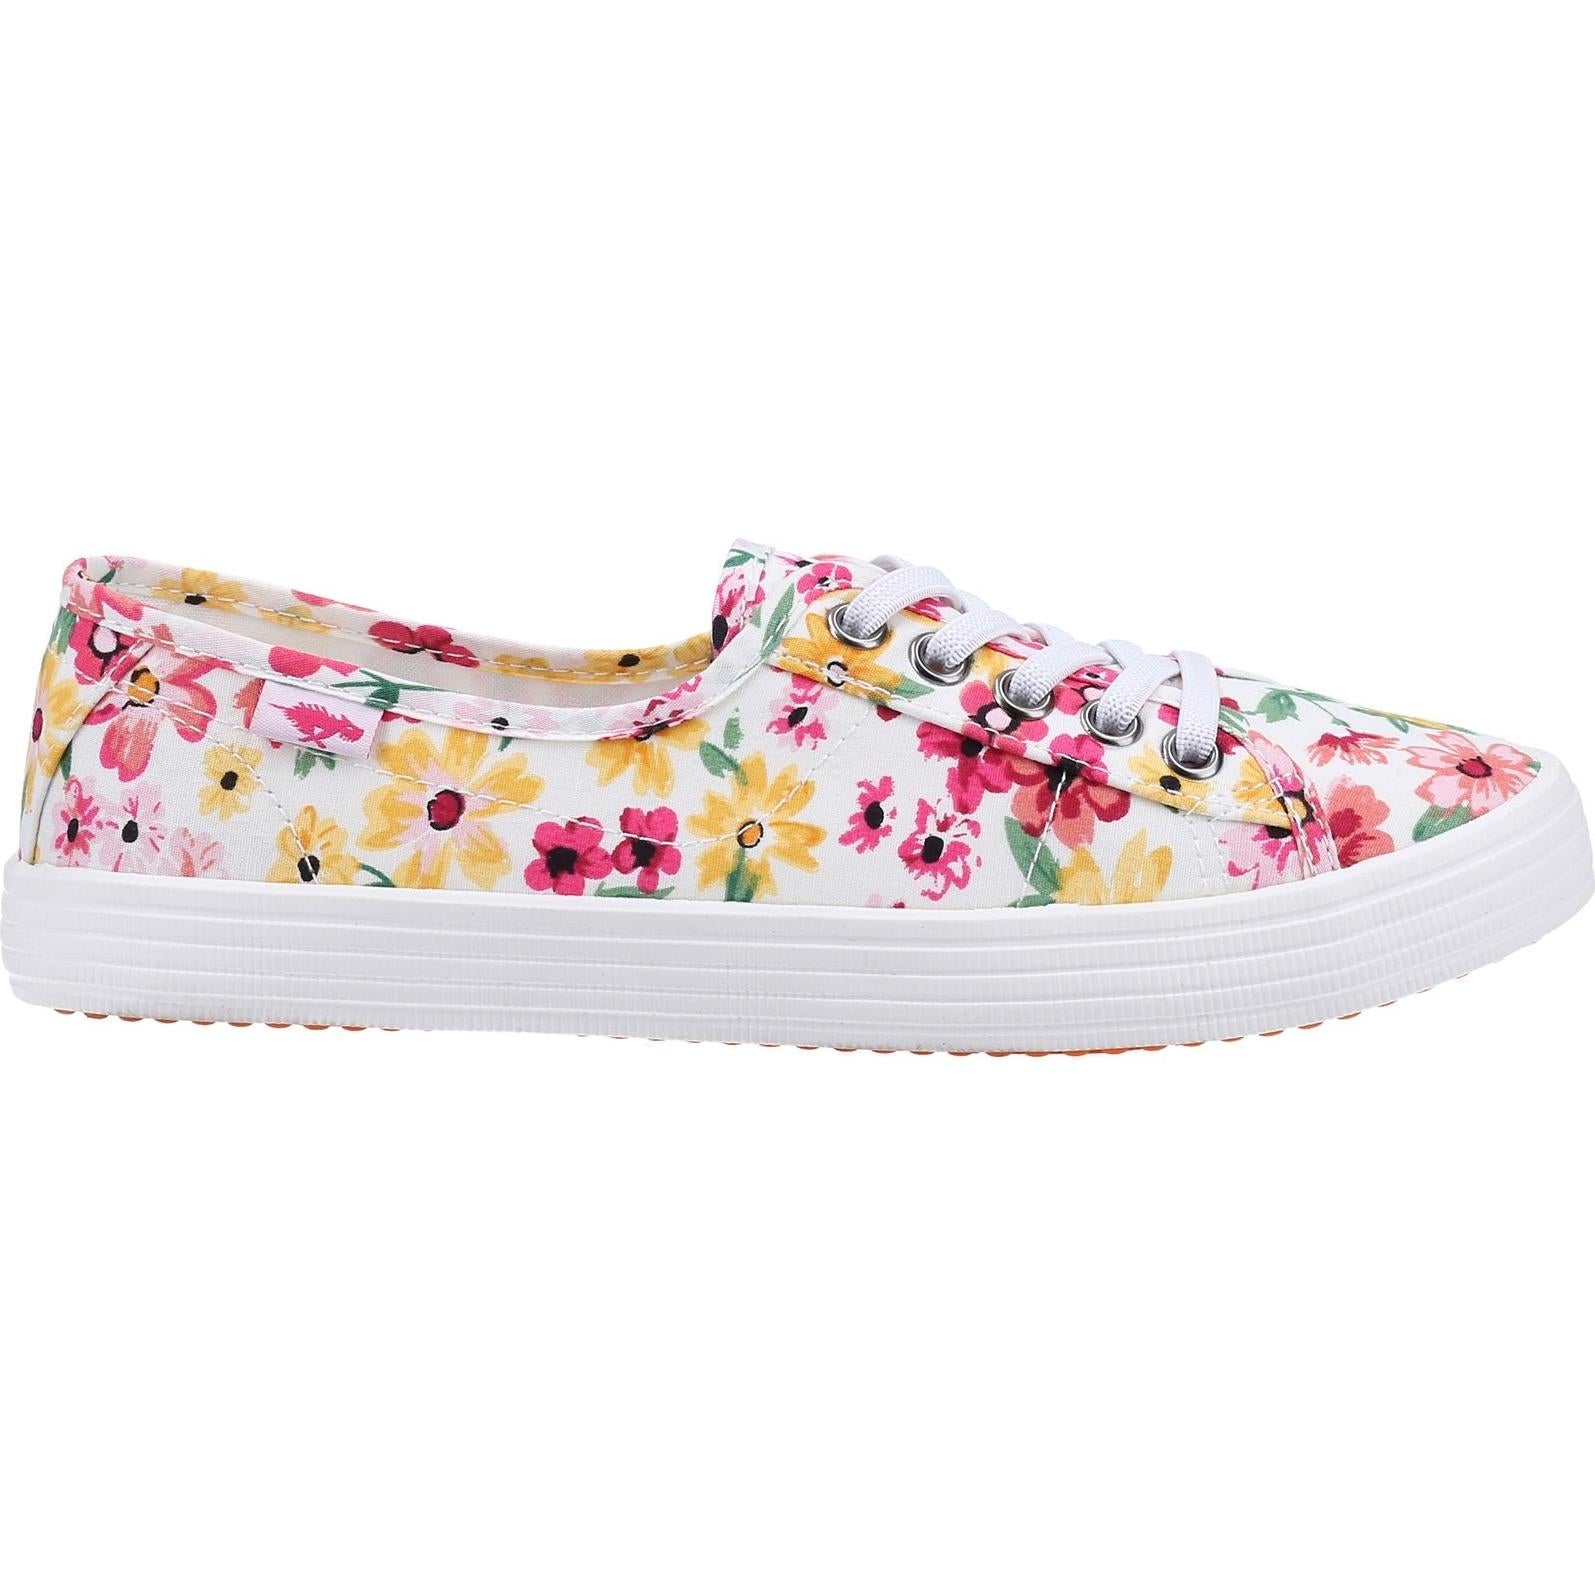 Rocket Dog Chow Chow Margate Floral Casual Shoe